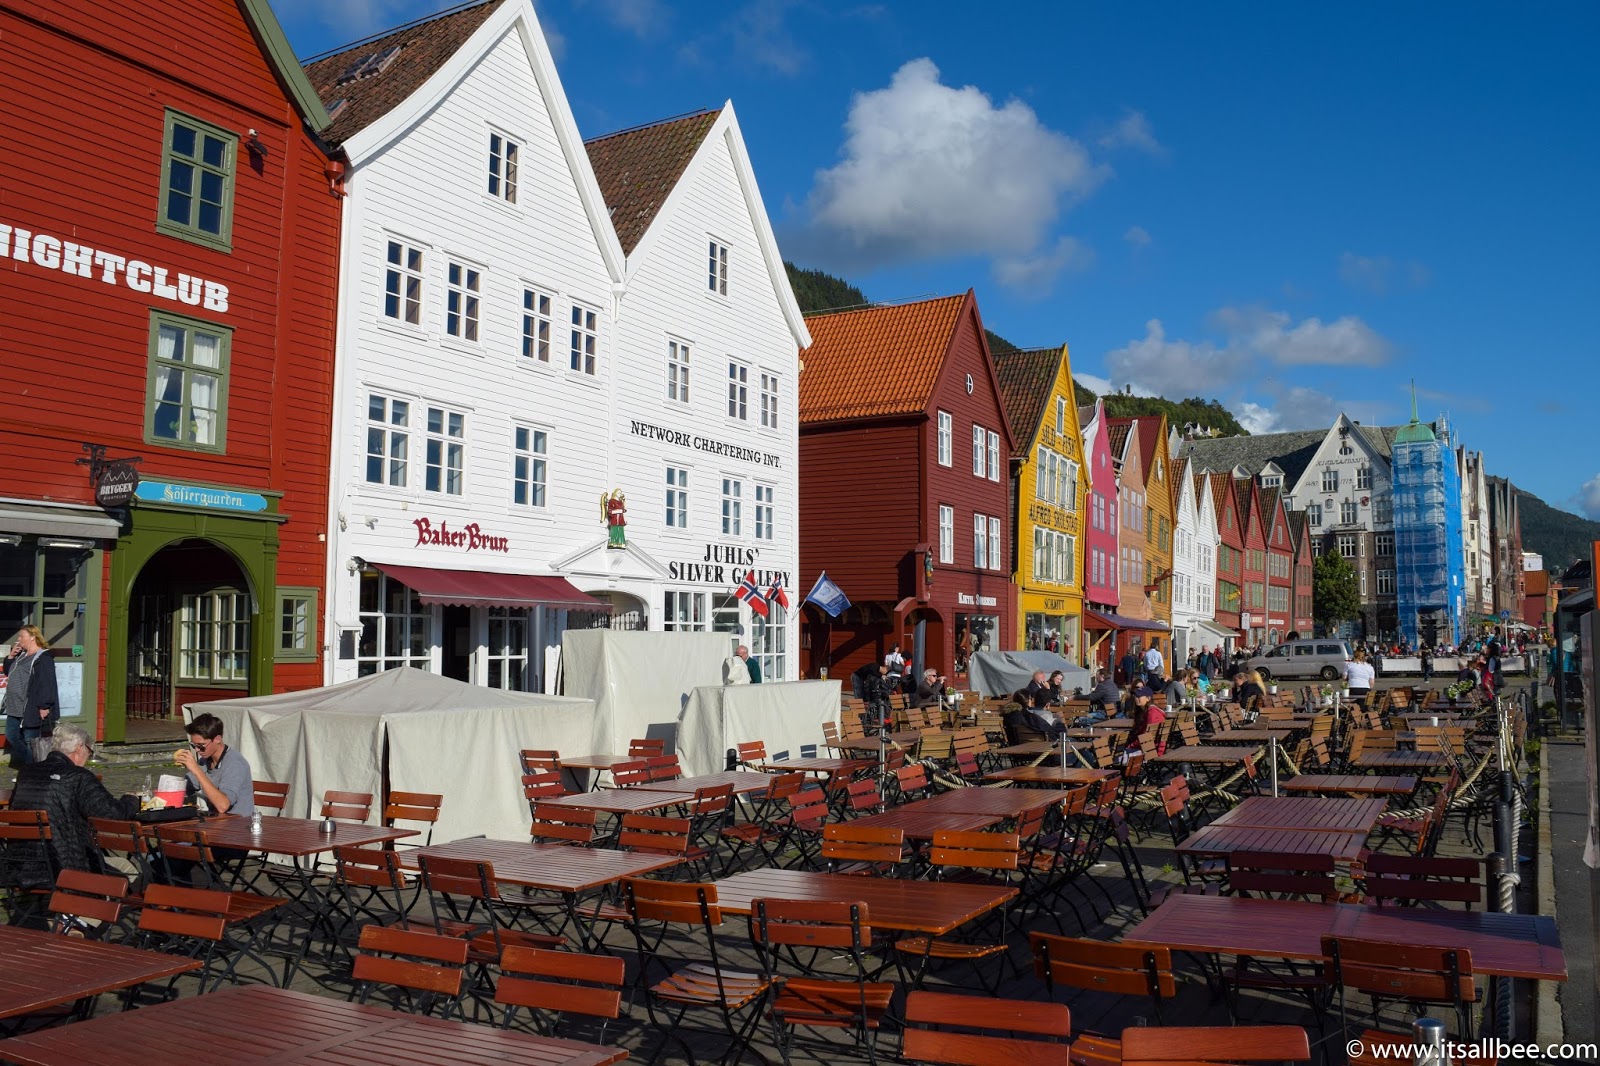 best things to do in bergen norway | things to do in bergen | fun things to do in bergen | best things to do in bergen | free things to do in bergen